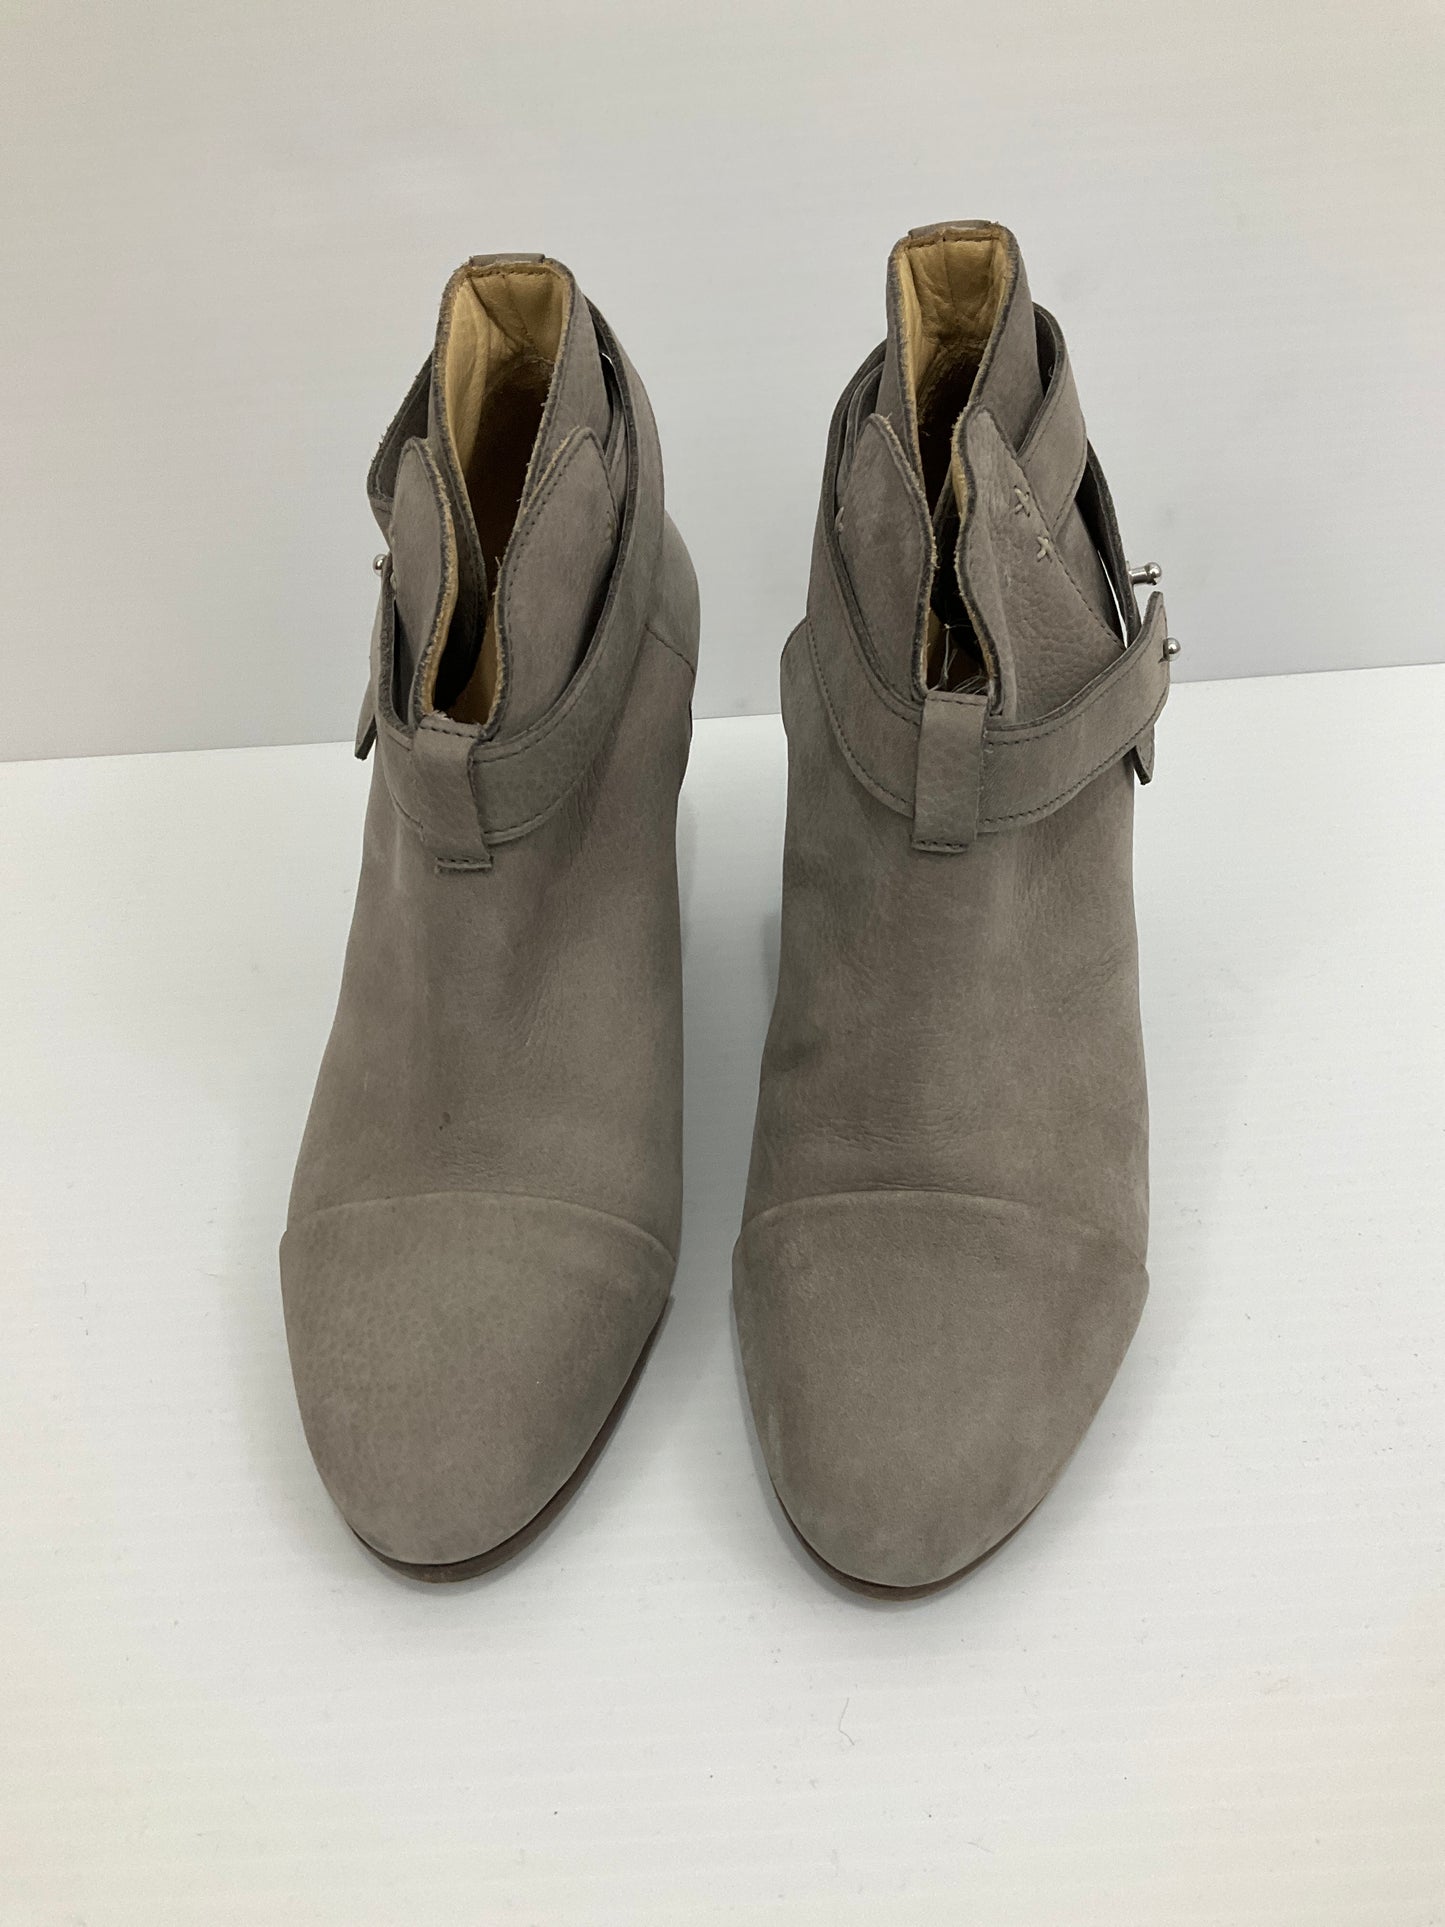 Boots Ankle Heels By Rag And Bone  Size: 8.5